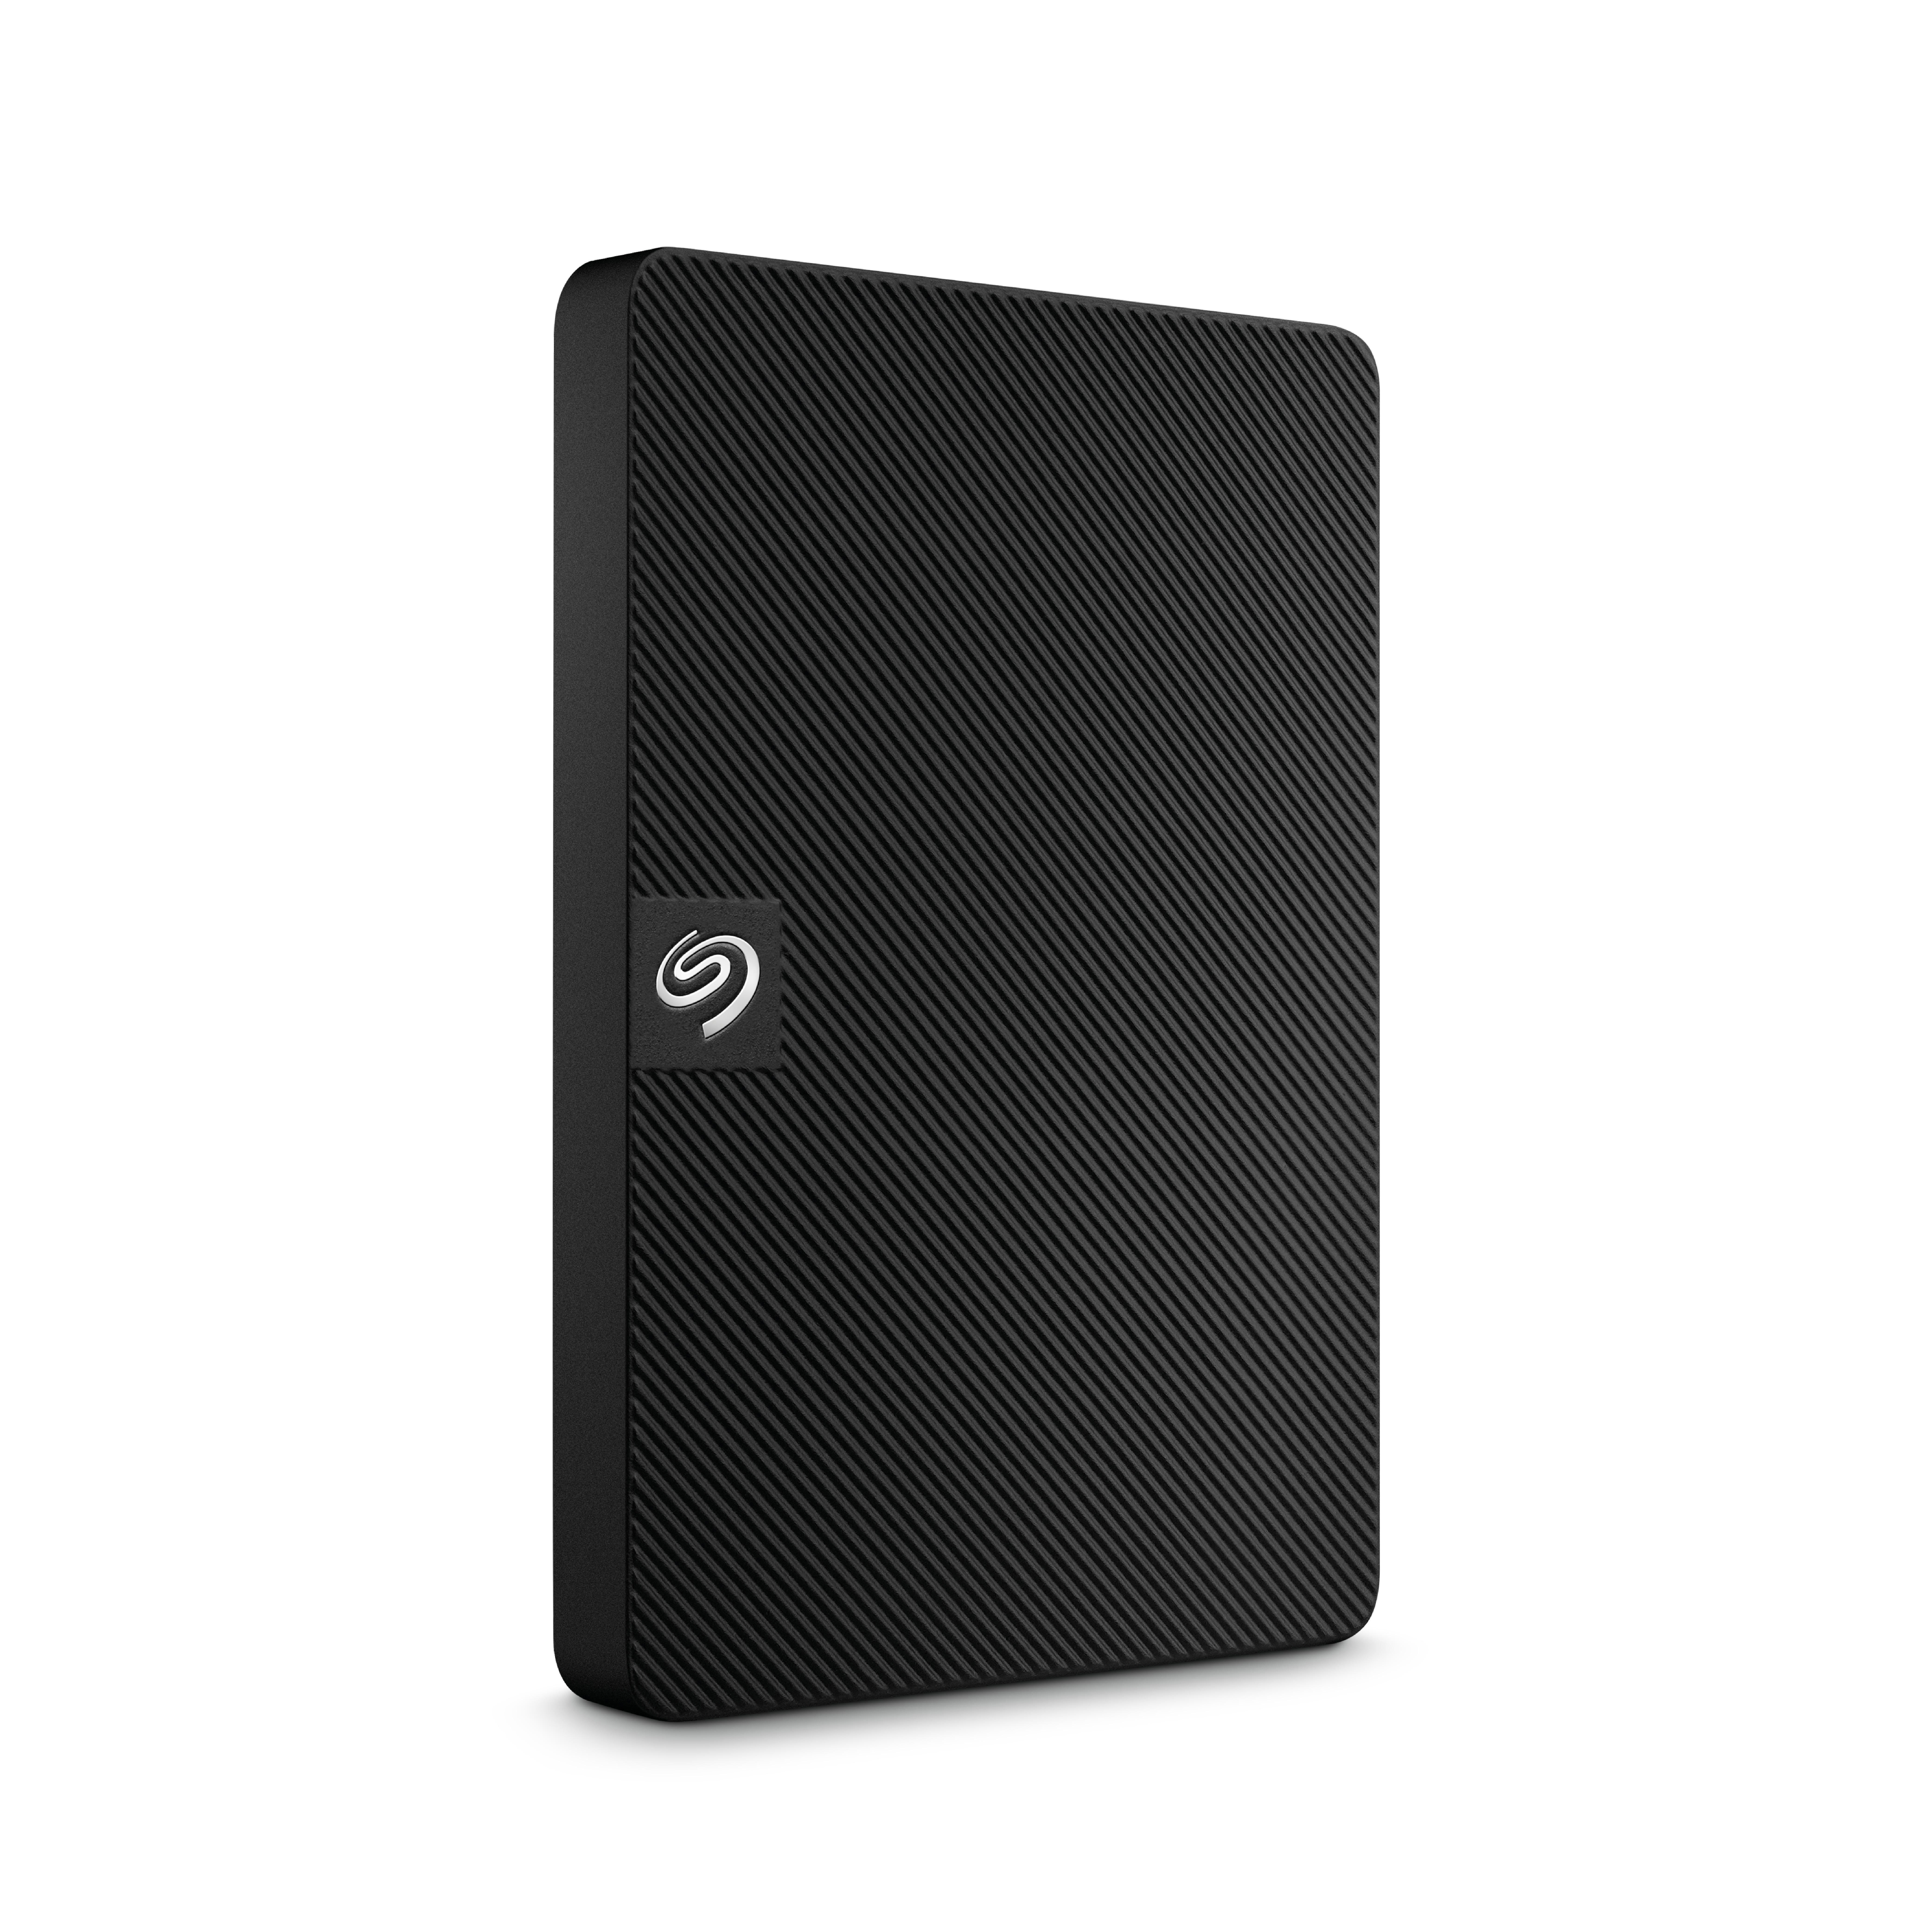 1 2,5 Edition extern, Festplatte, Zoll, Expansion Portable, Schwarz TB SEAGATE HDD, Exclusive